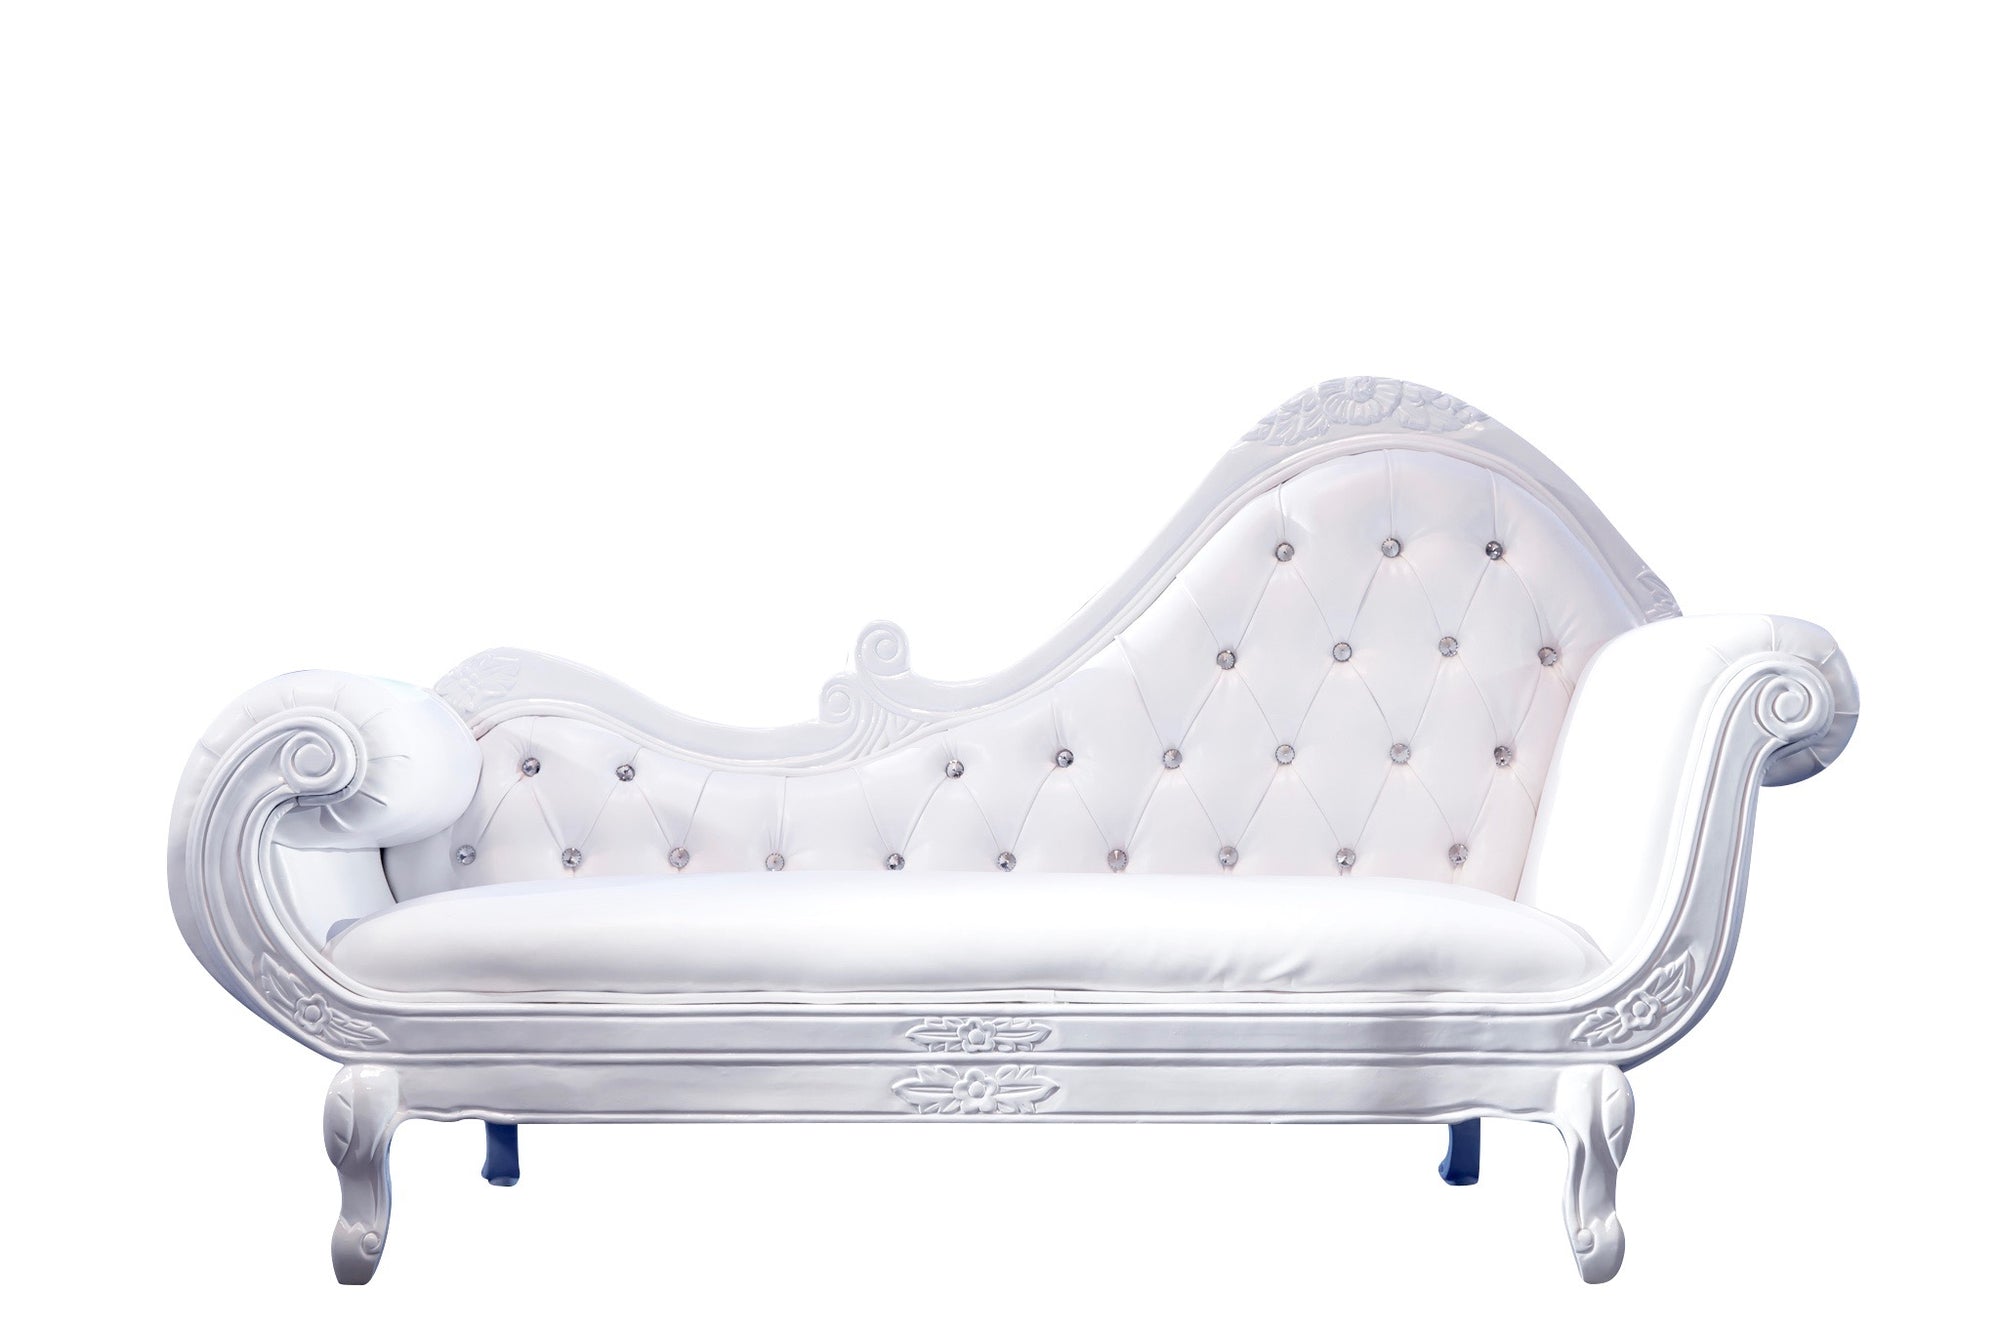 Specialty Chaise Lounges